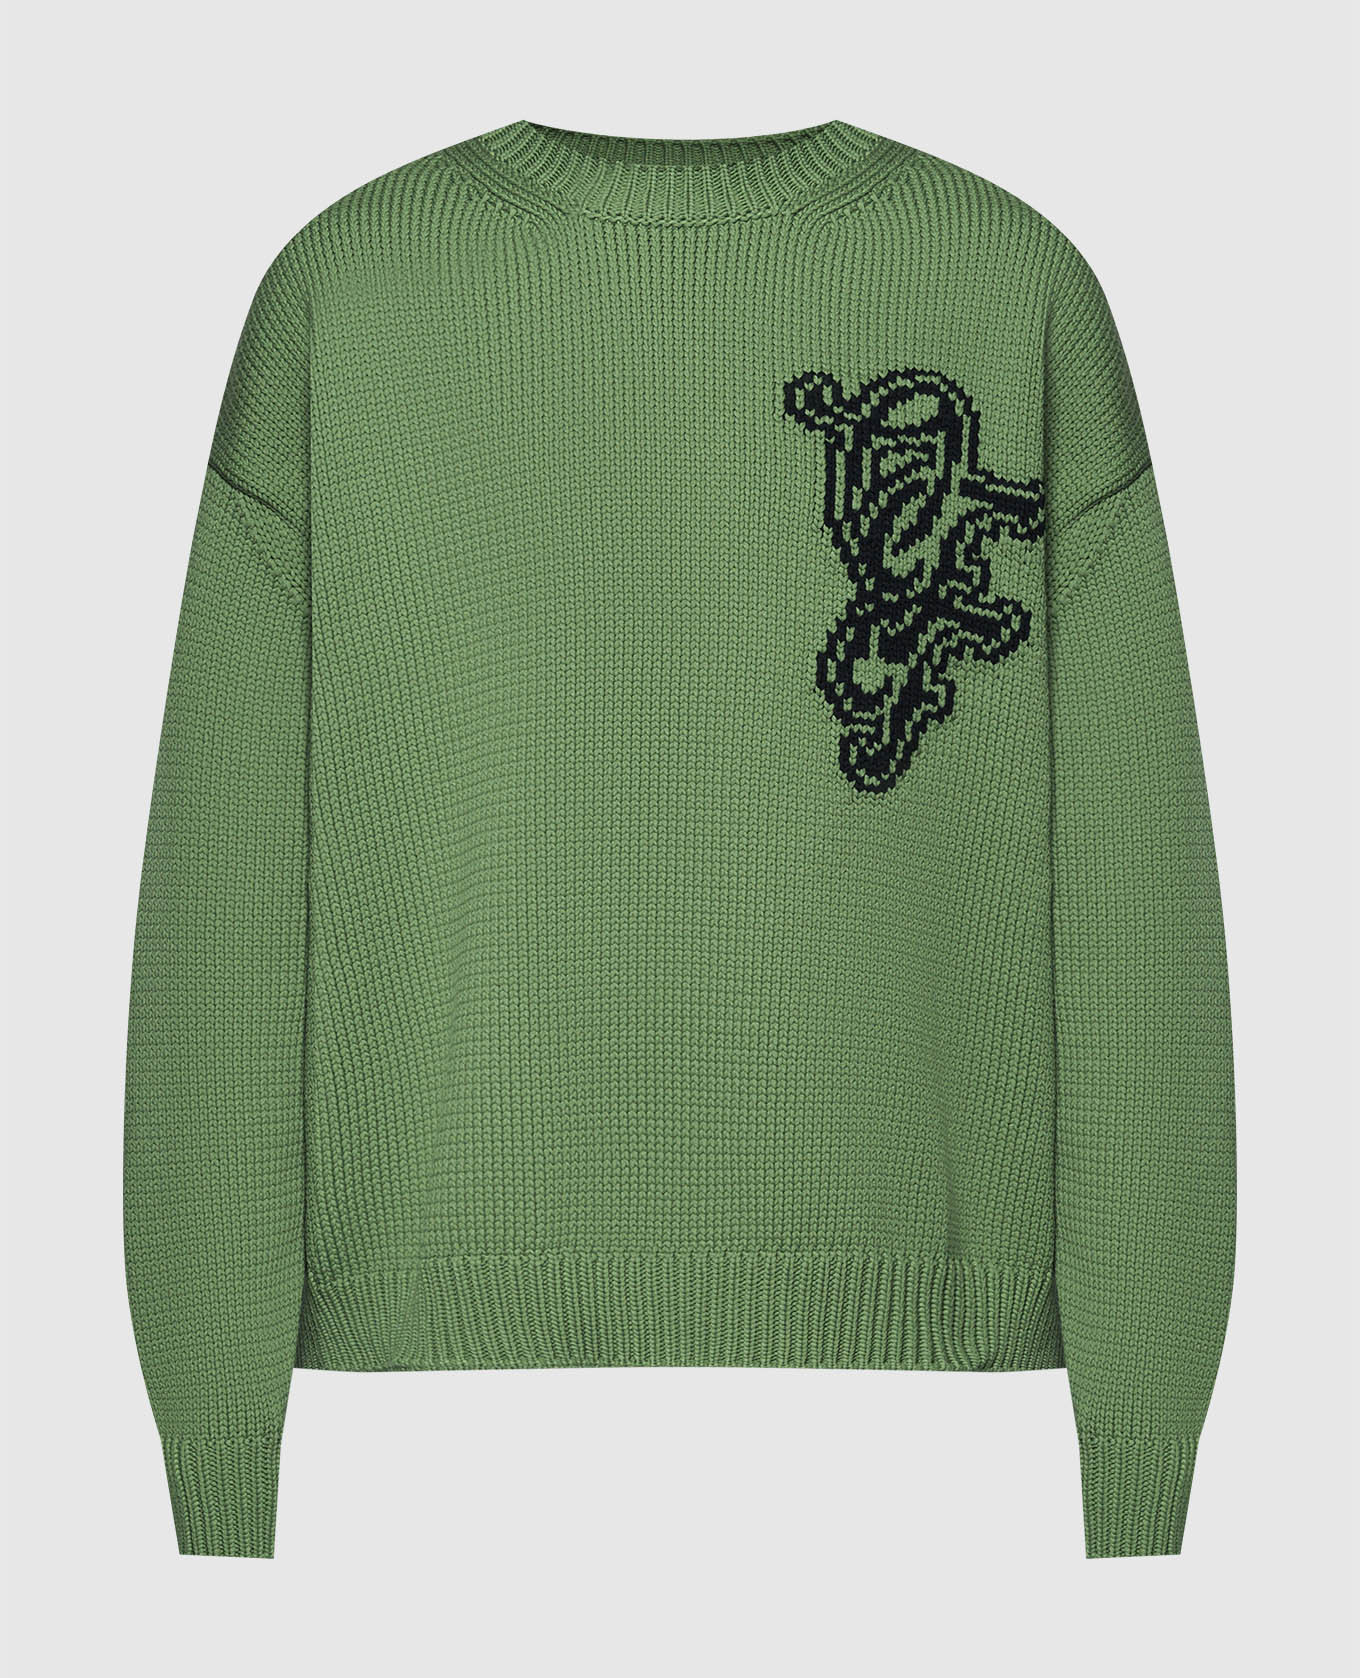 Natlover green sweater with logo pattern